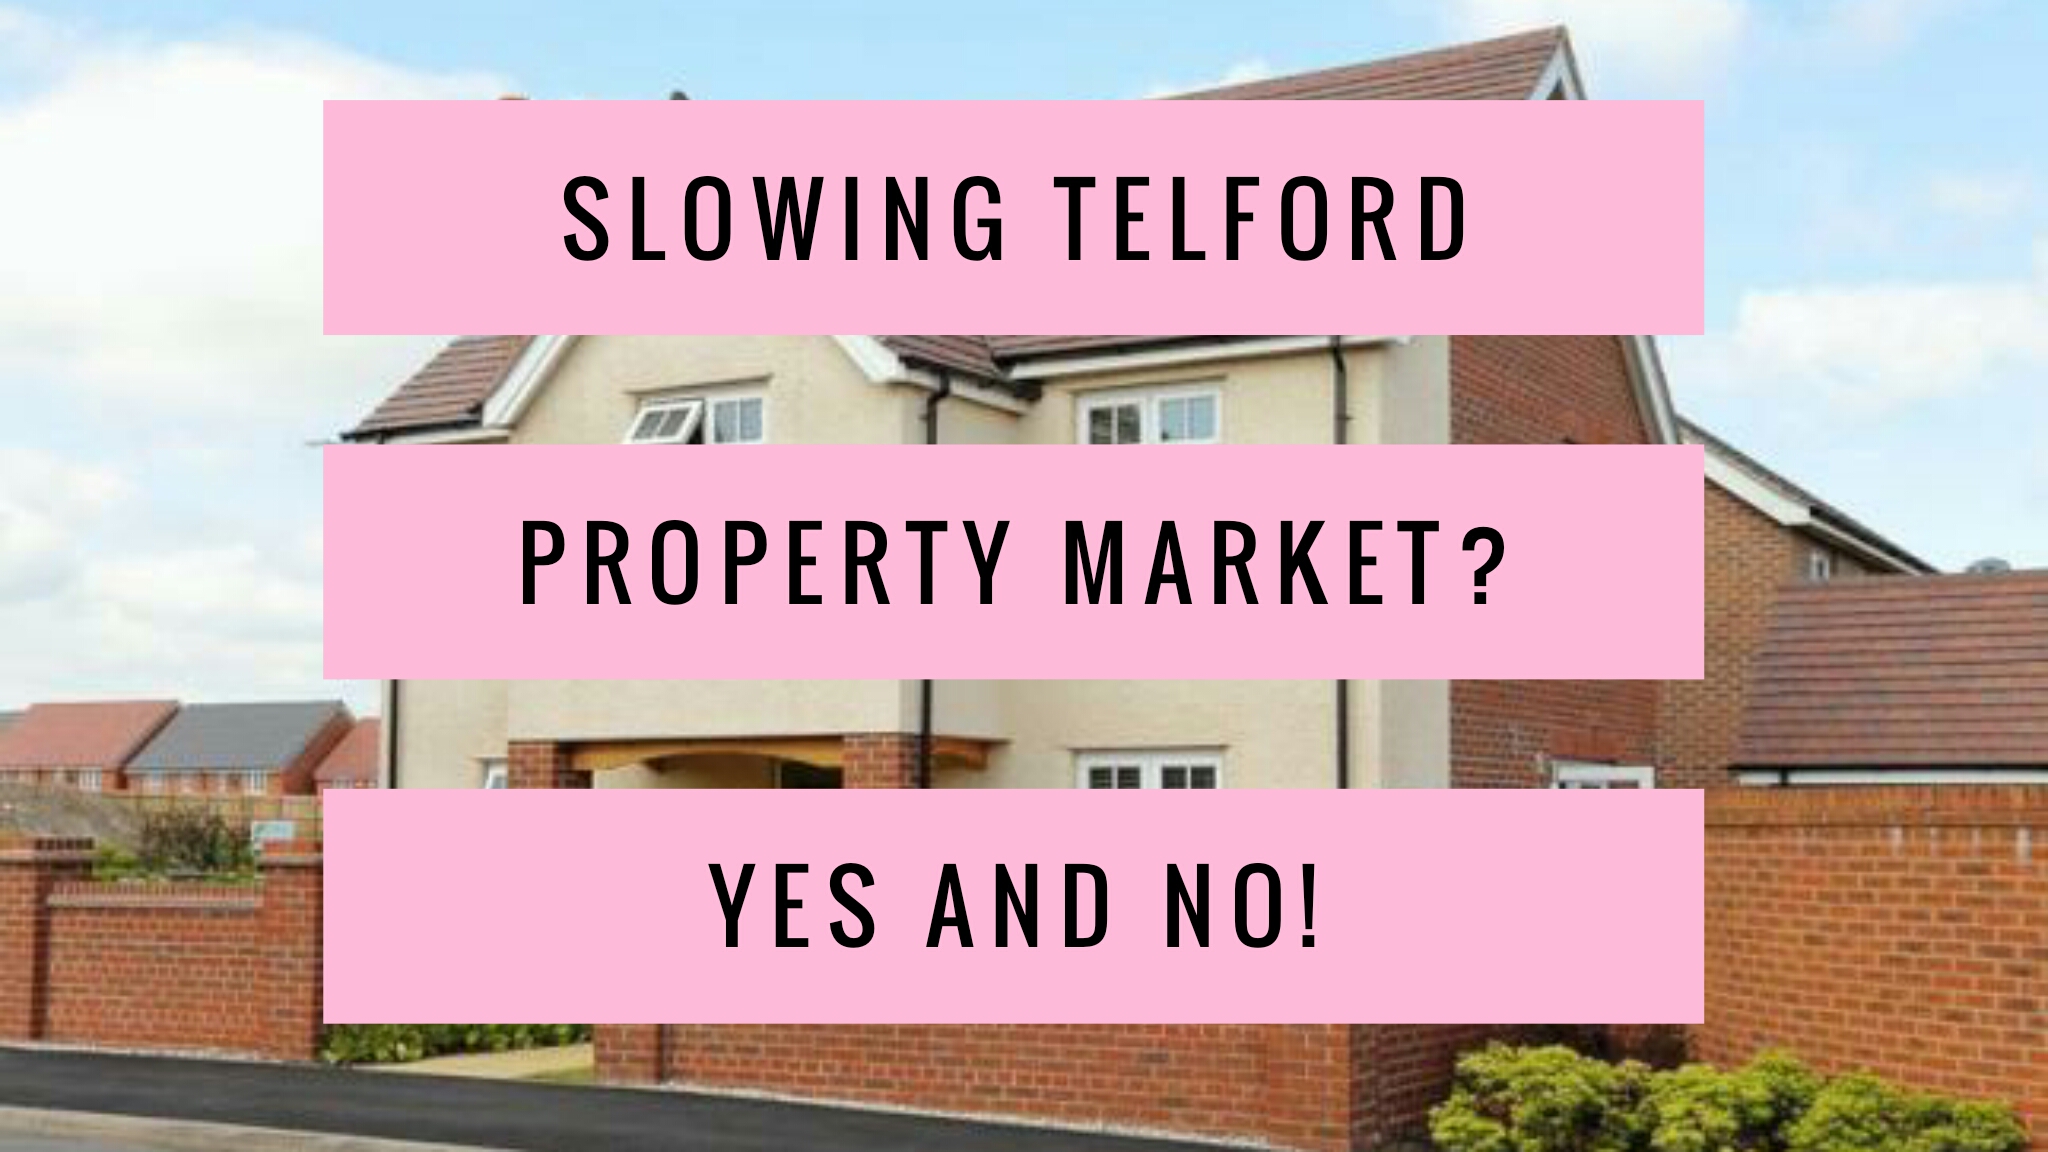 Slowing Telford Property Market? Yes and No!